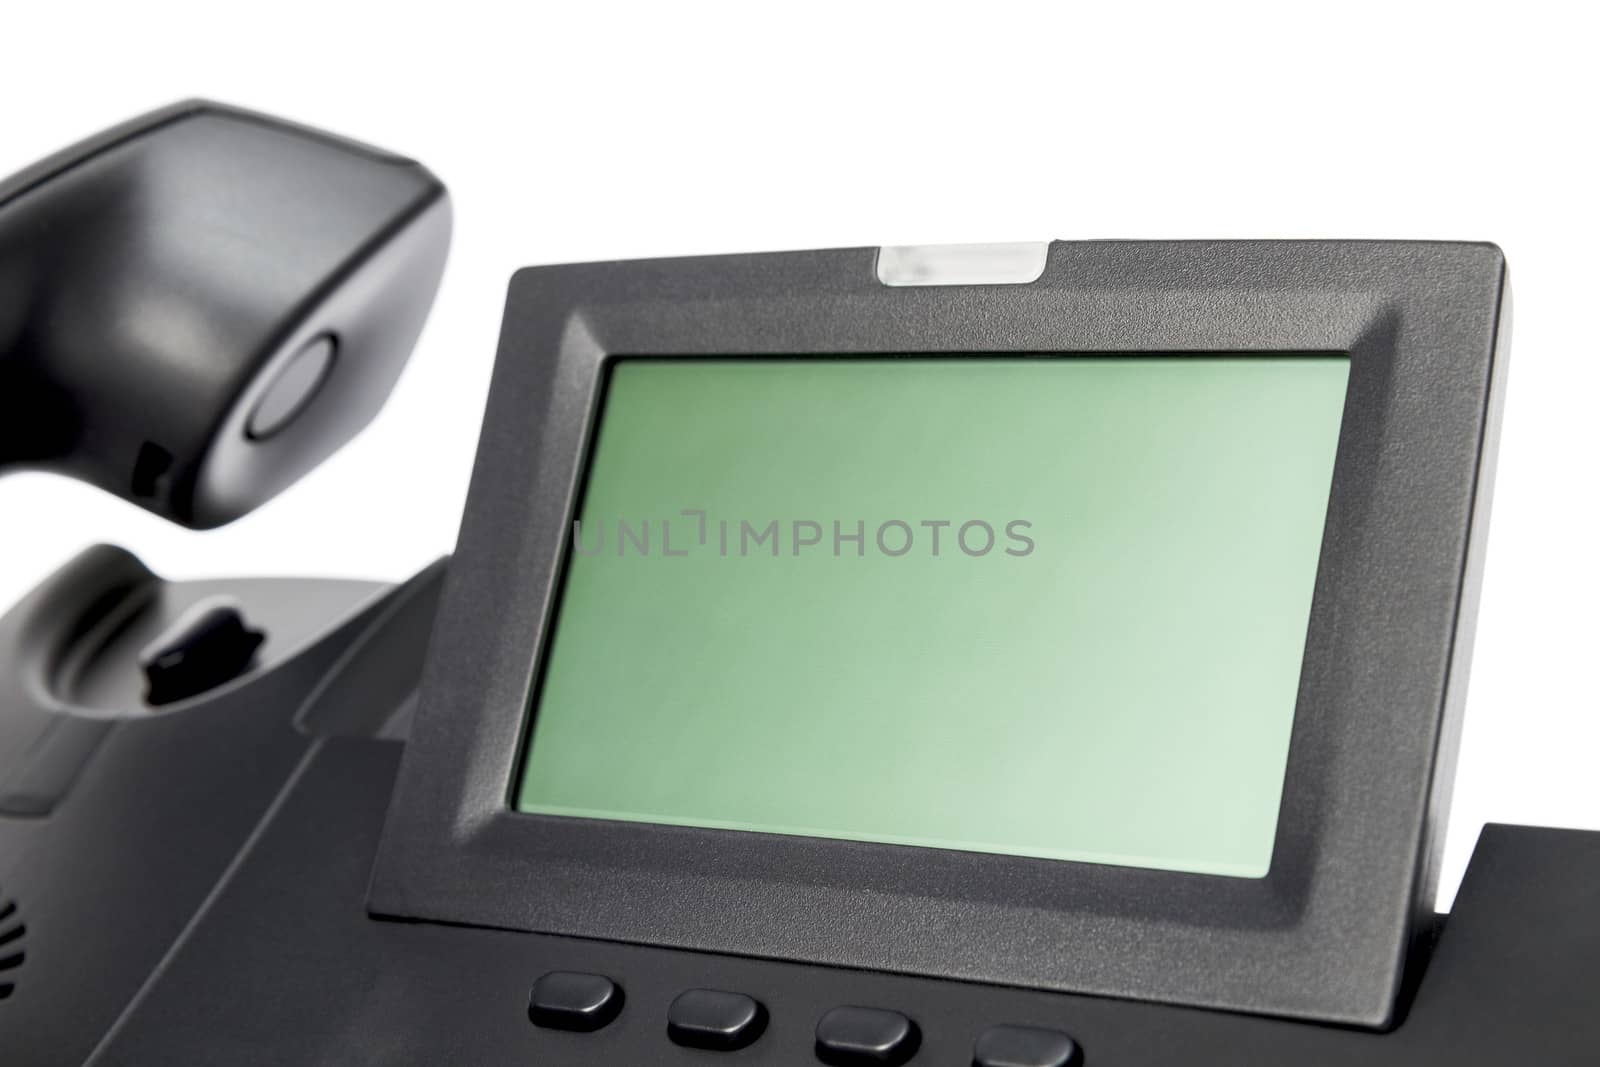 display of modern business phone isolated in white background. close up